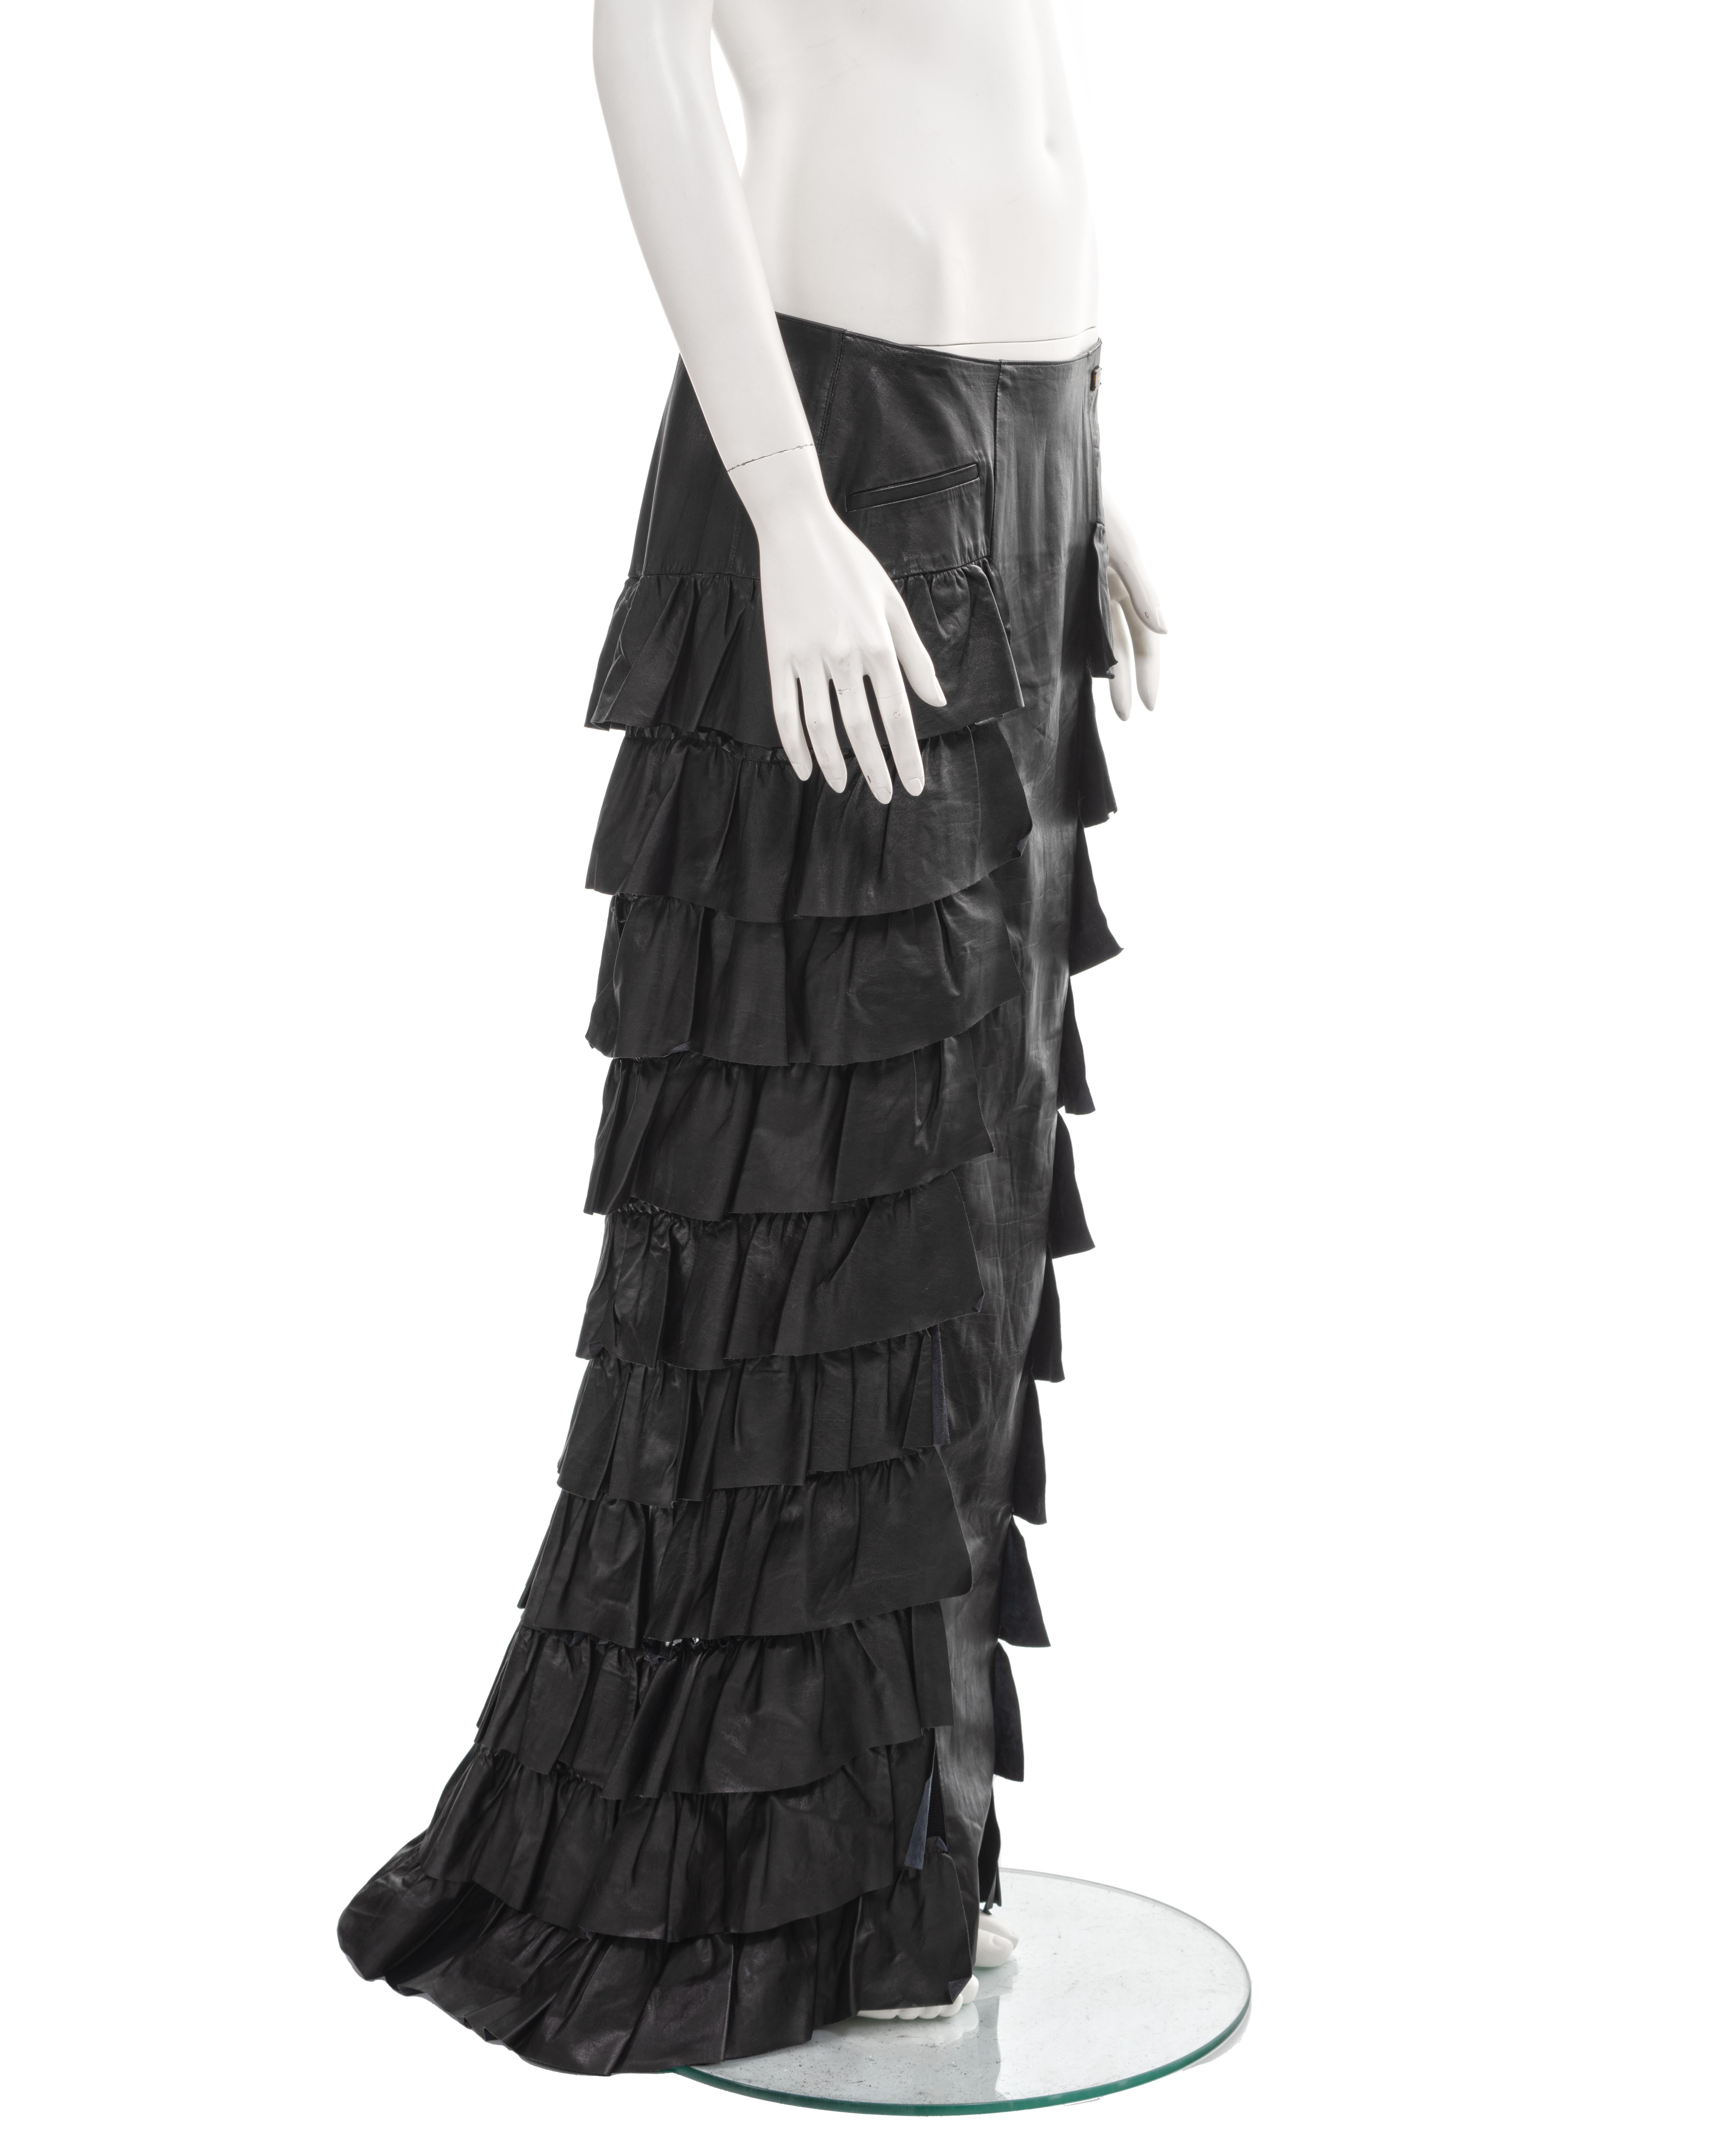 Chanel by Karl Lagerfeld black leather tiered ruffled maxi skirt, fw 2001 2